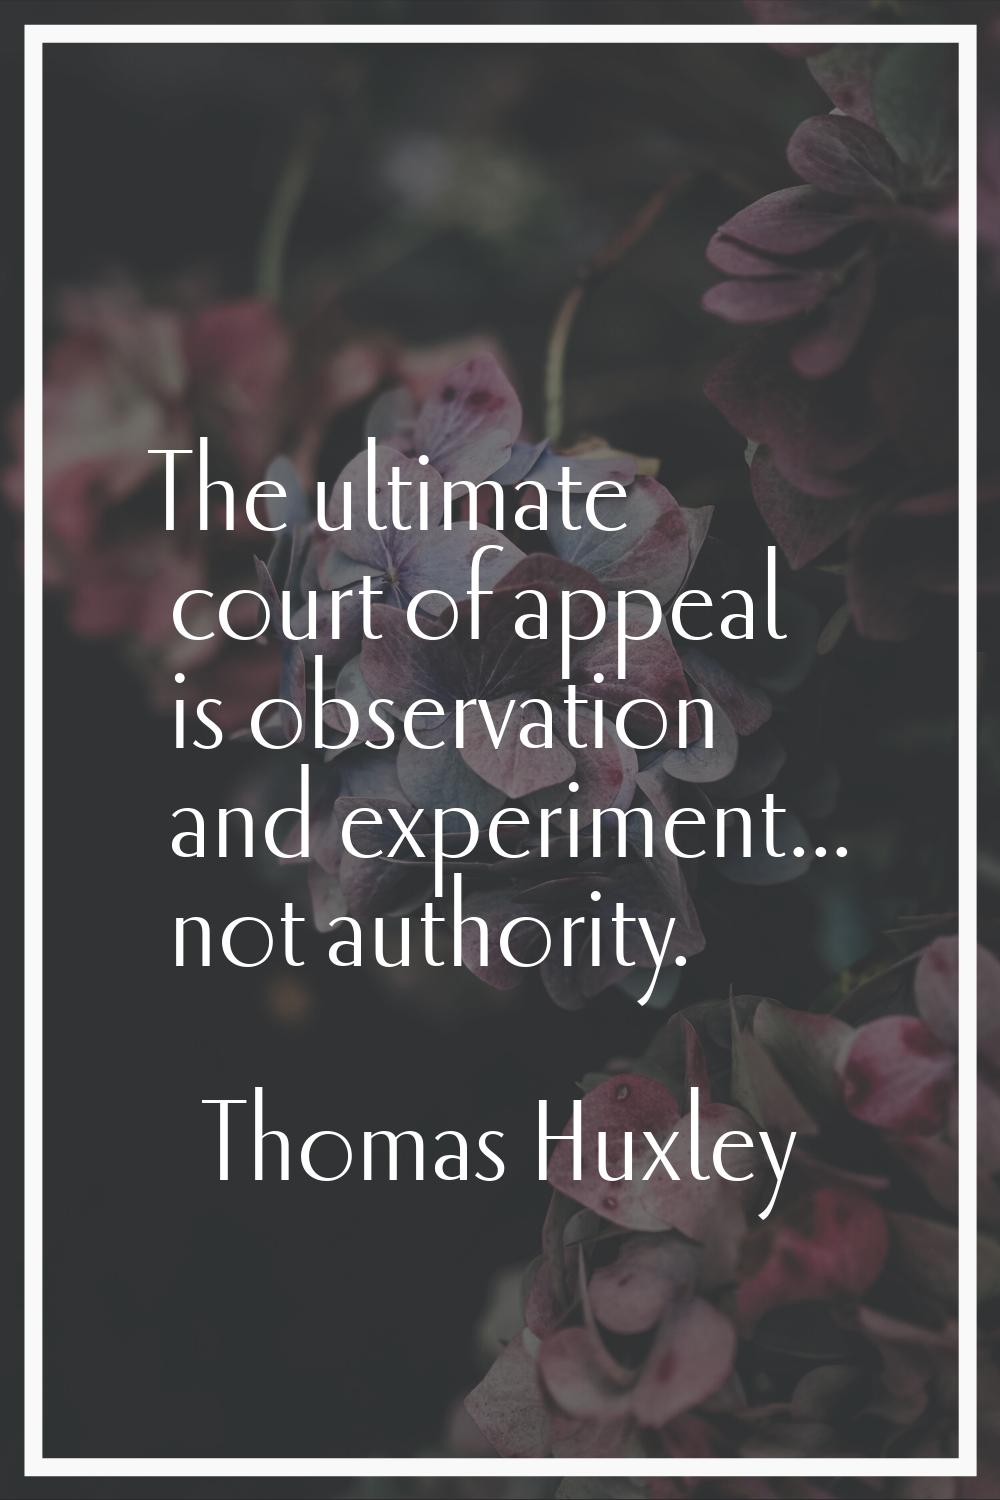 The ultimate court of appeal is observation and experiment... not authority.